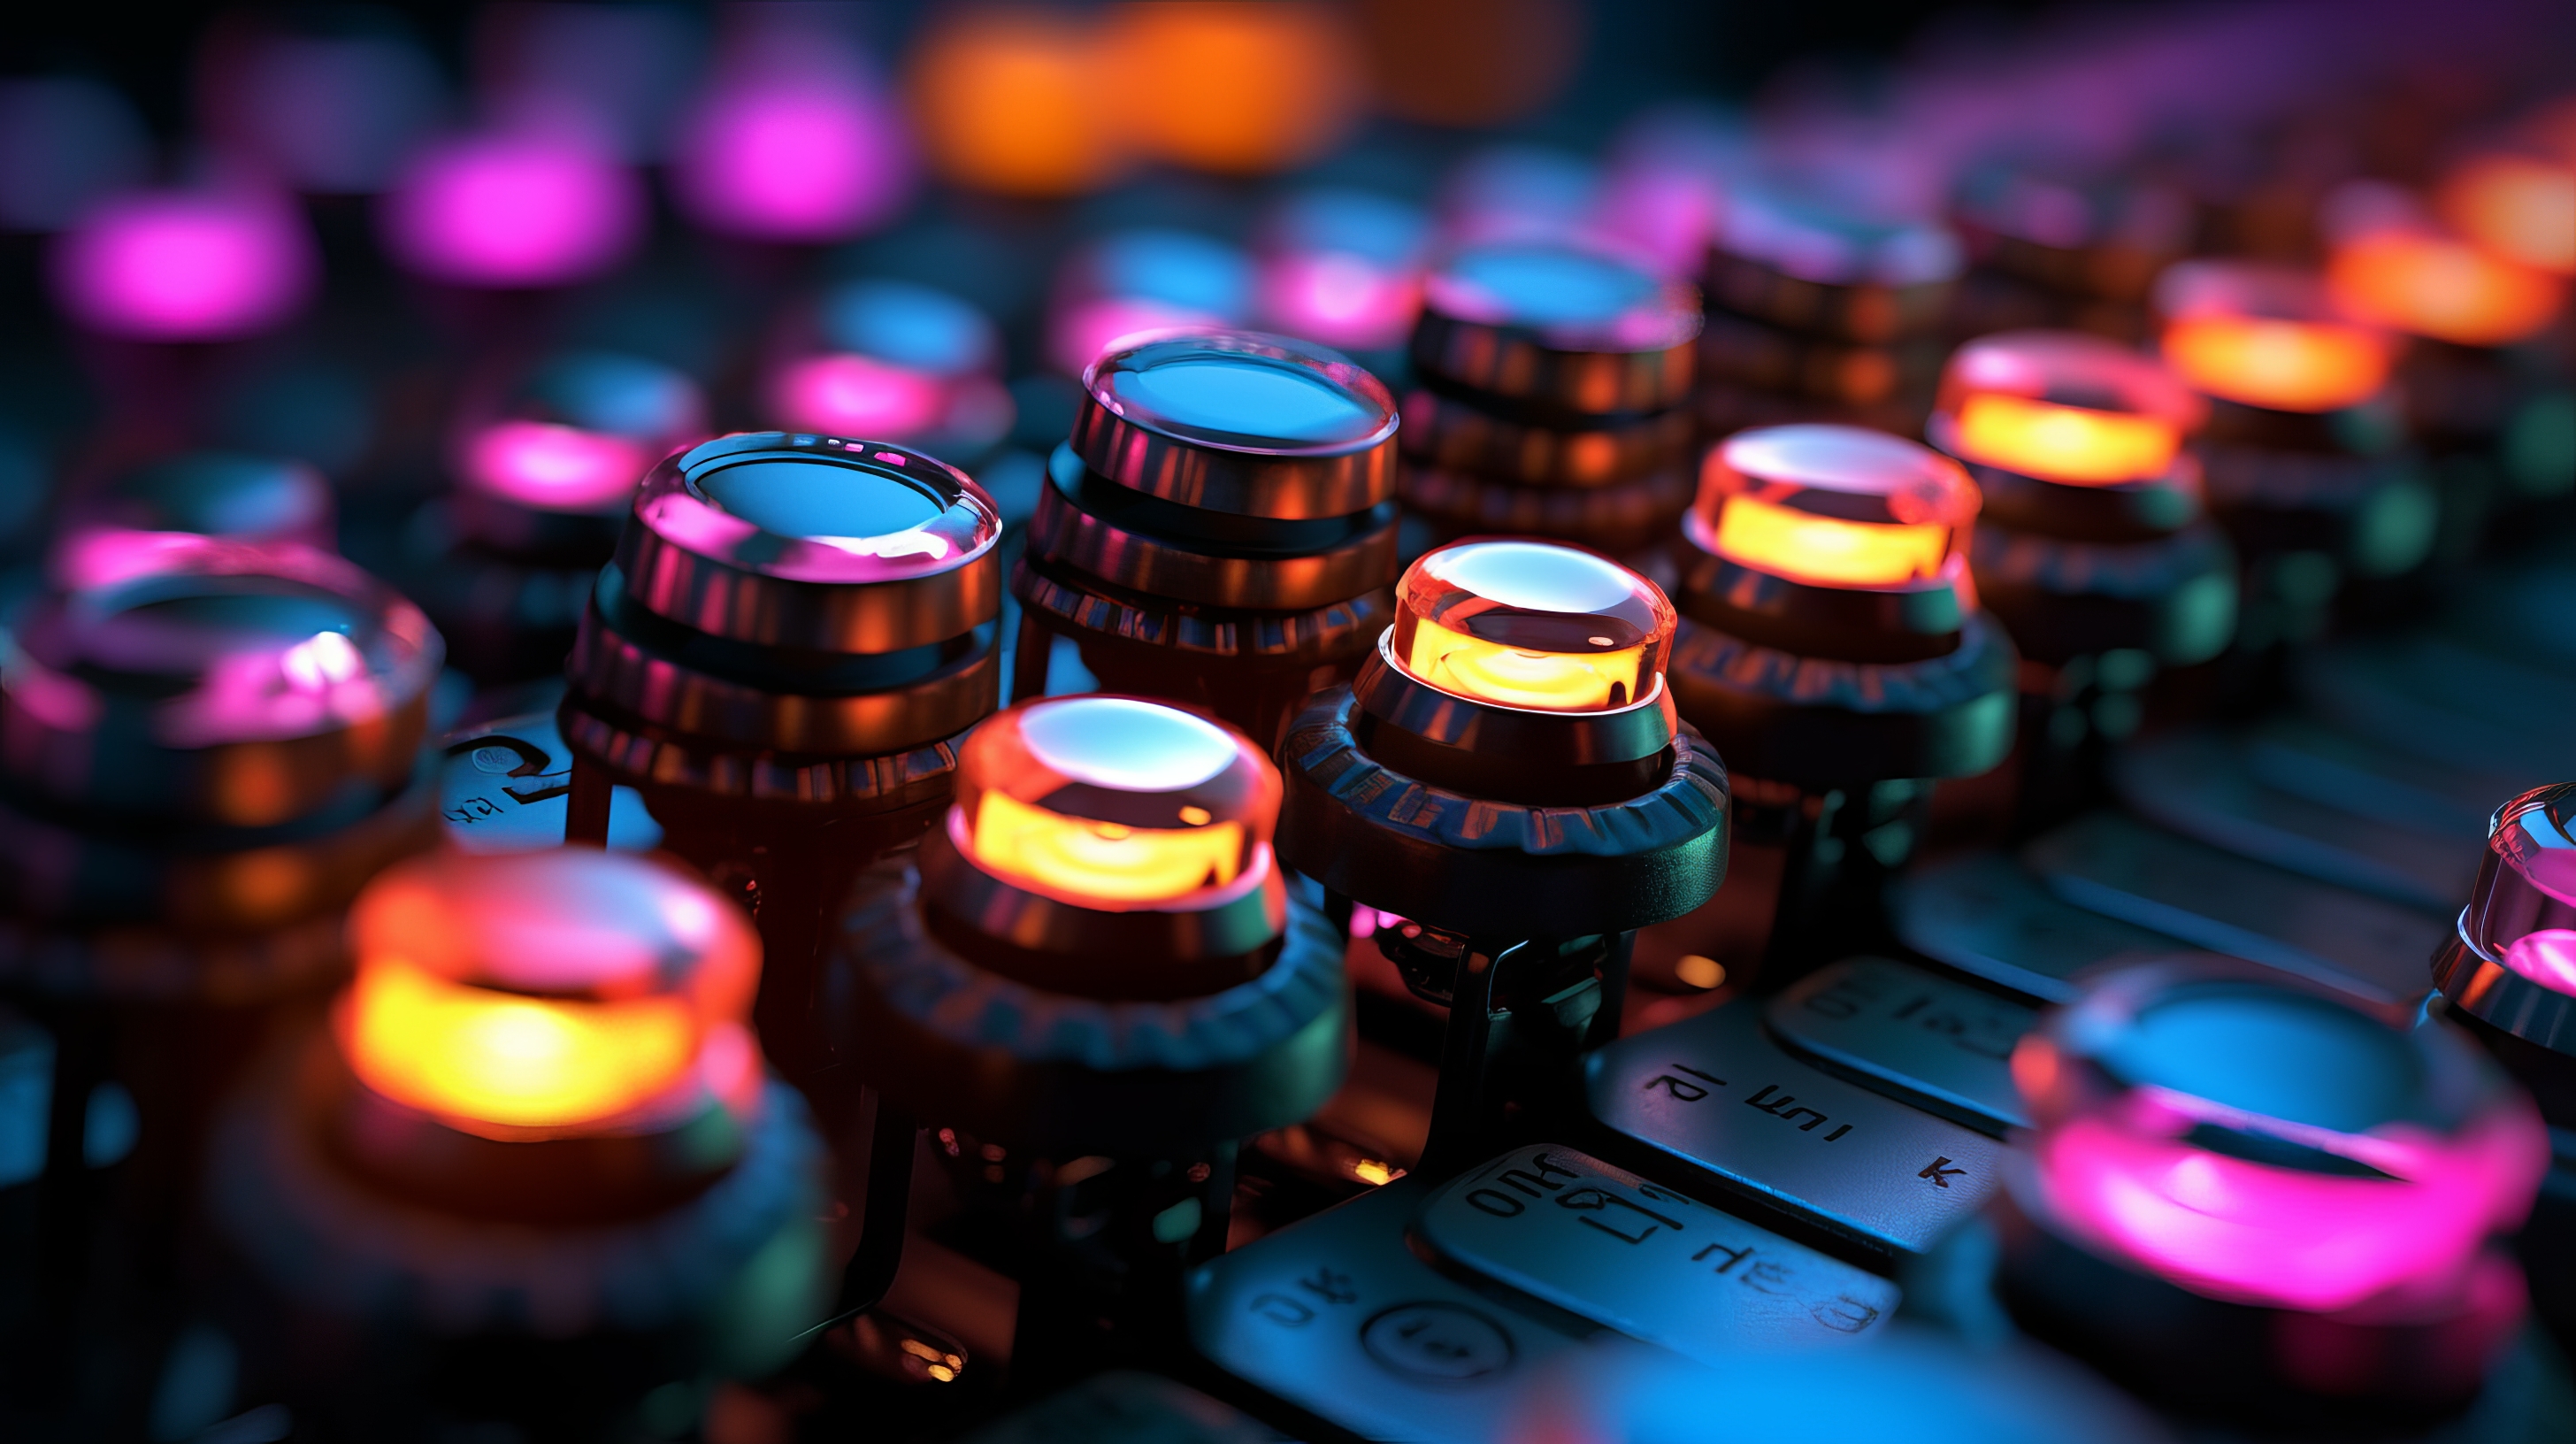 General 2912x1632 AI art buttons colorful mixing consoles closeup illustration neon blurry background blurred